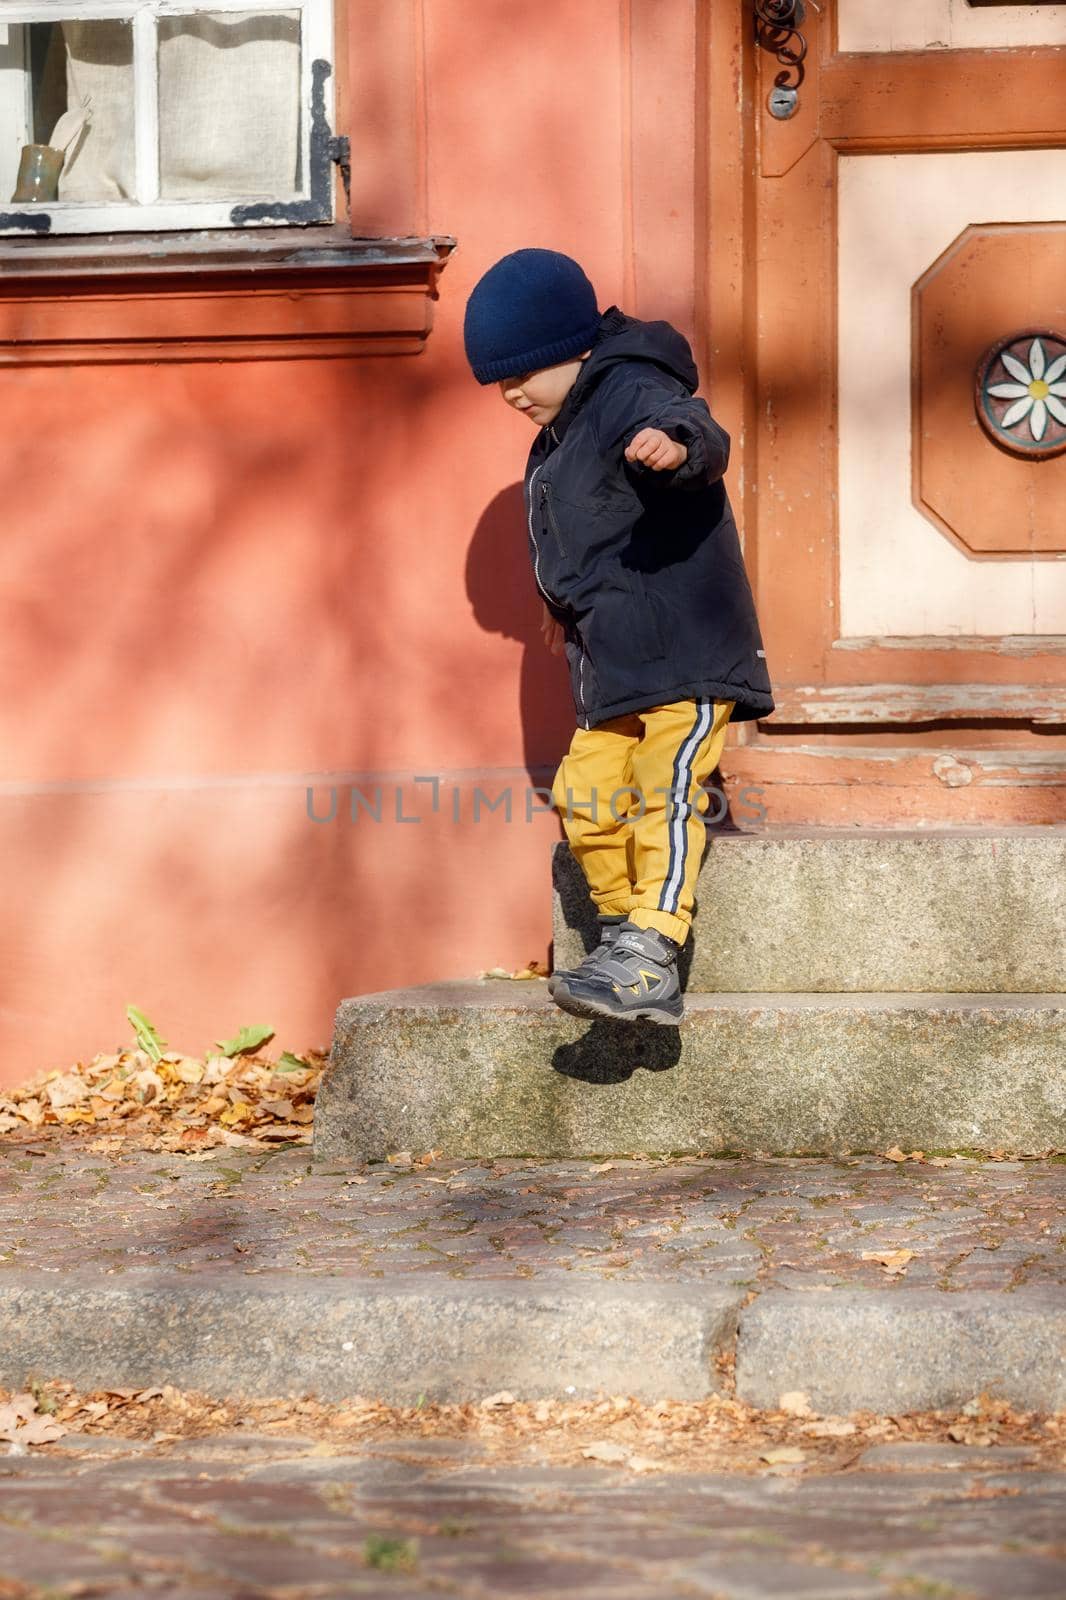 A cute boy in a autumn jacket with a blue hat goes for a walk around the old town. The child is self-climbing the stairs by Lincikas